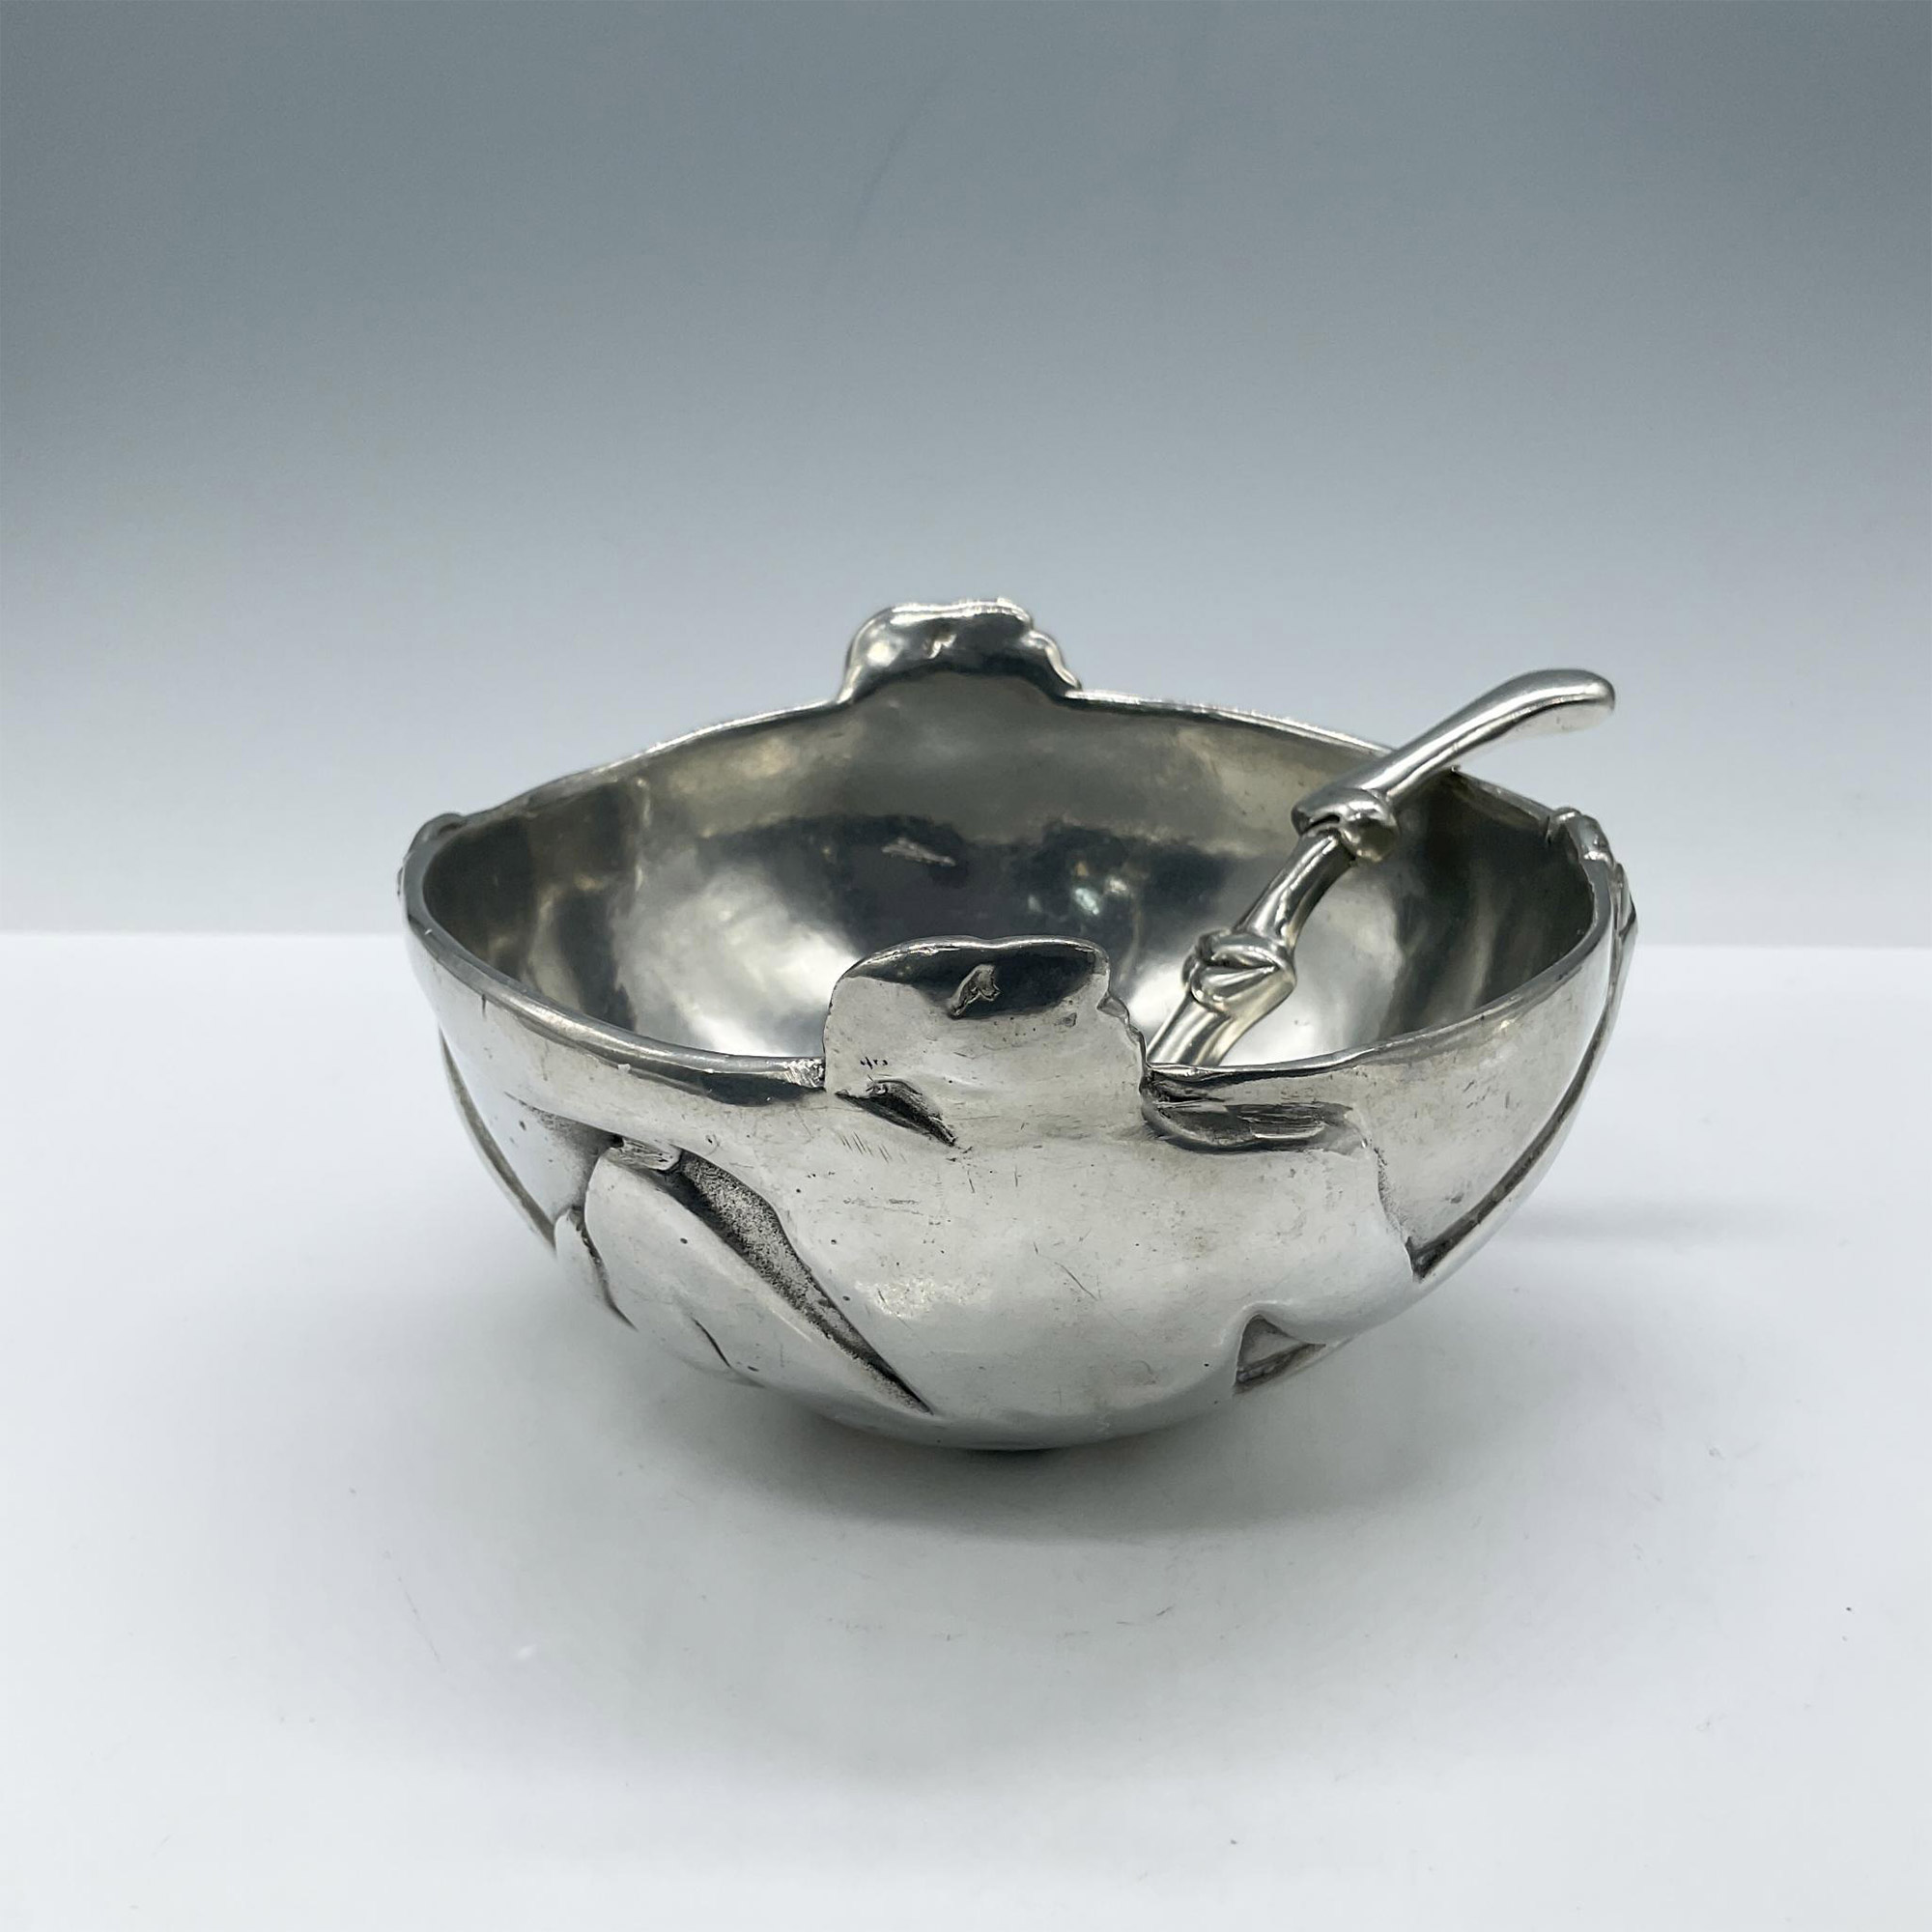 2pc Carrol Boyes Figural Pewter Bowl and Spoon - Image 3 of 5